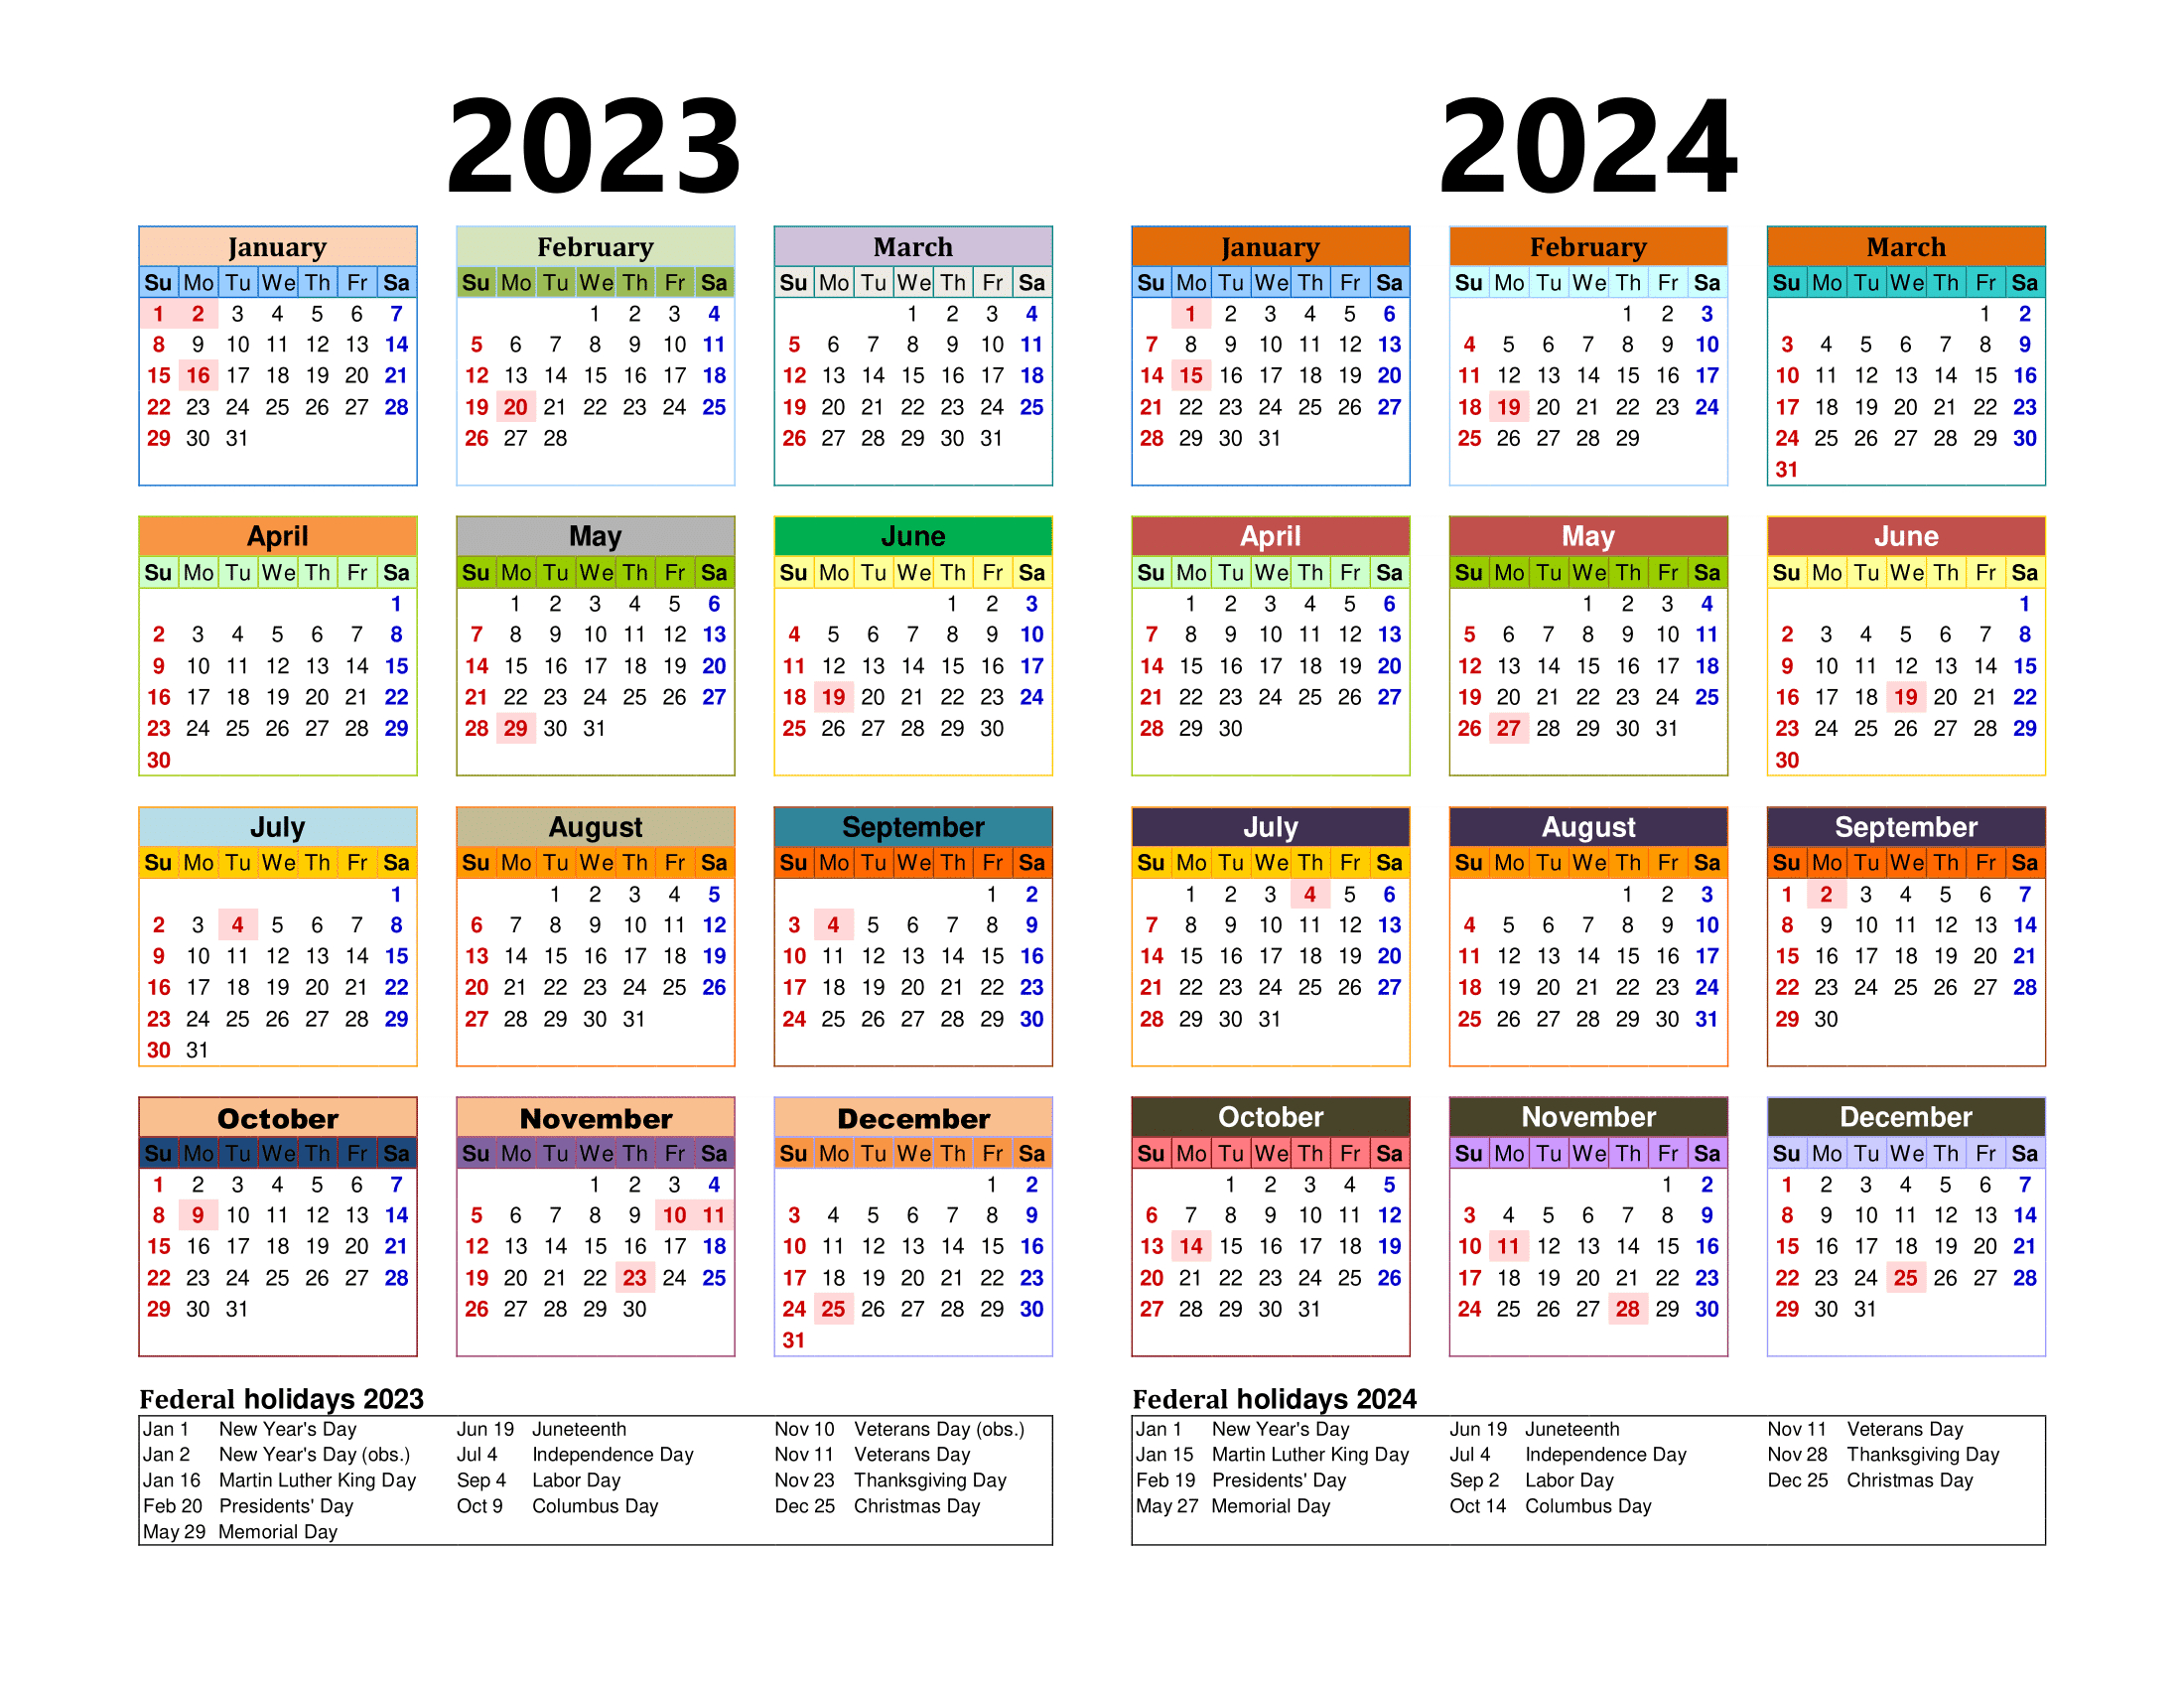 Free Printable Two Year Calendar Templates For 2023 And 2024 In Pdf | 2023 and 2024 Printable Calendar